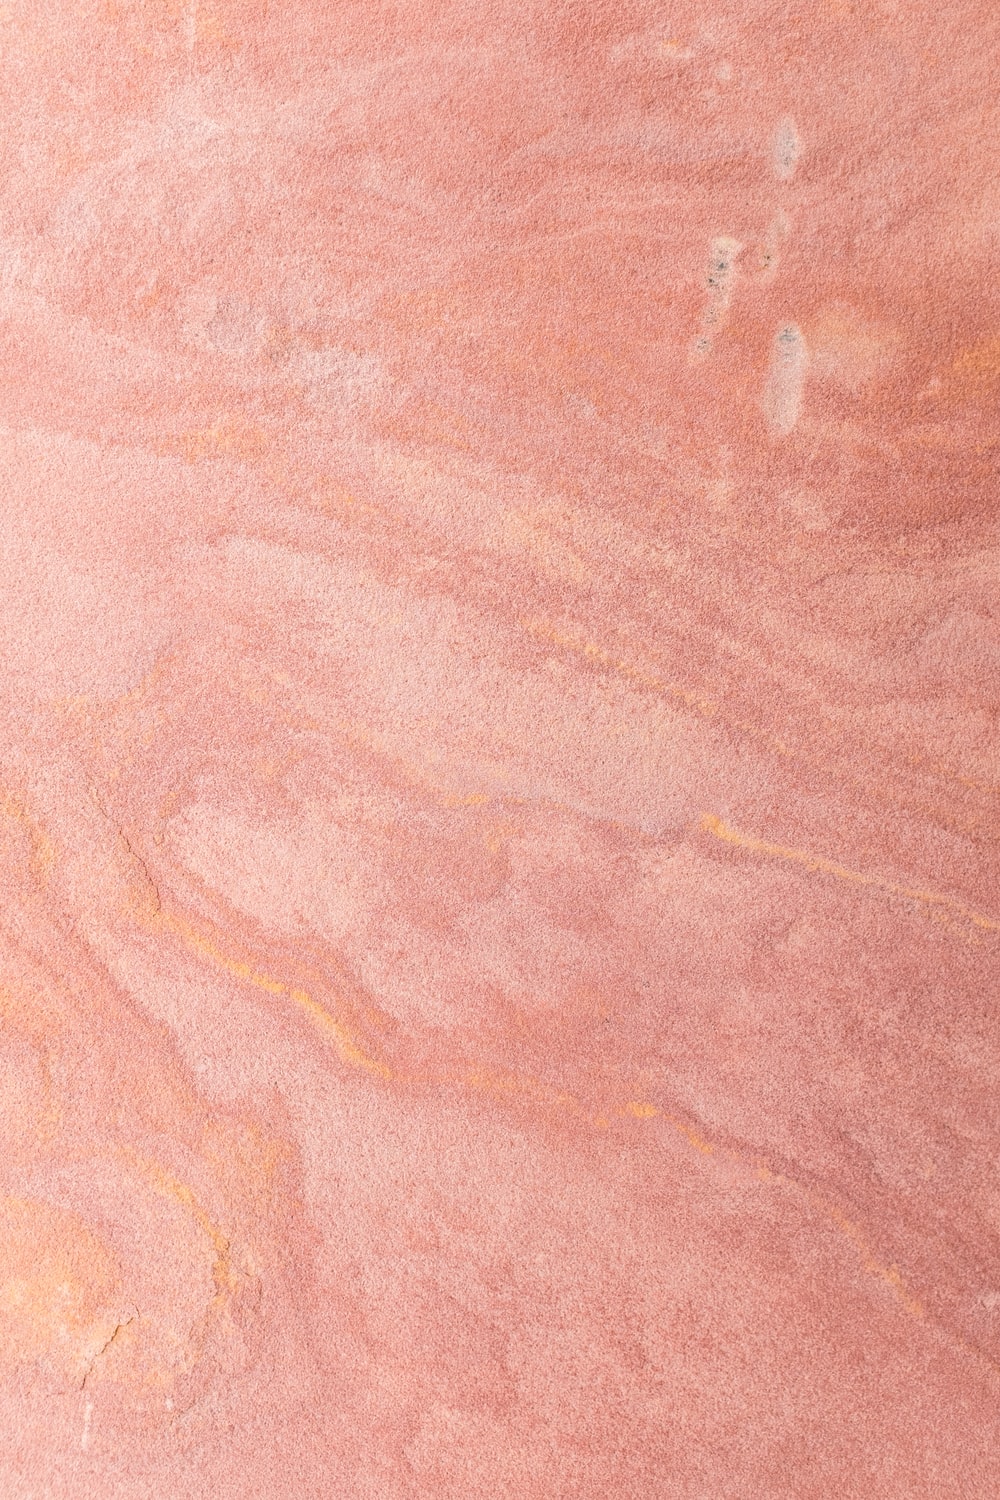 Rose Gold Wallpapers: Free HD Download [500+ HQ]